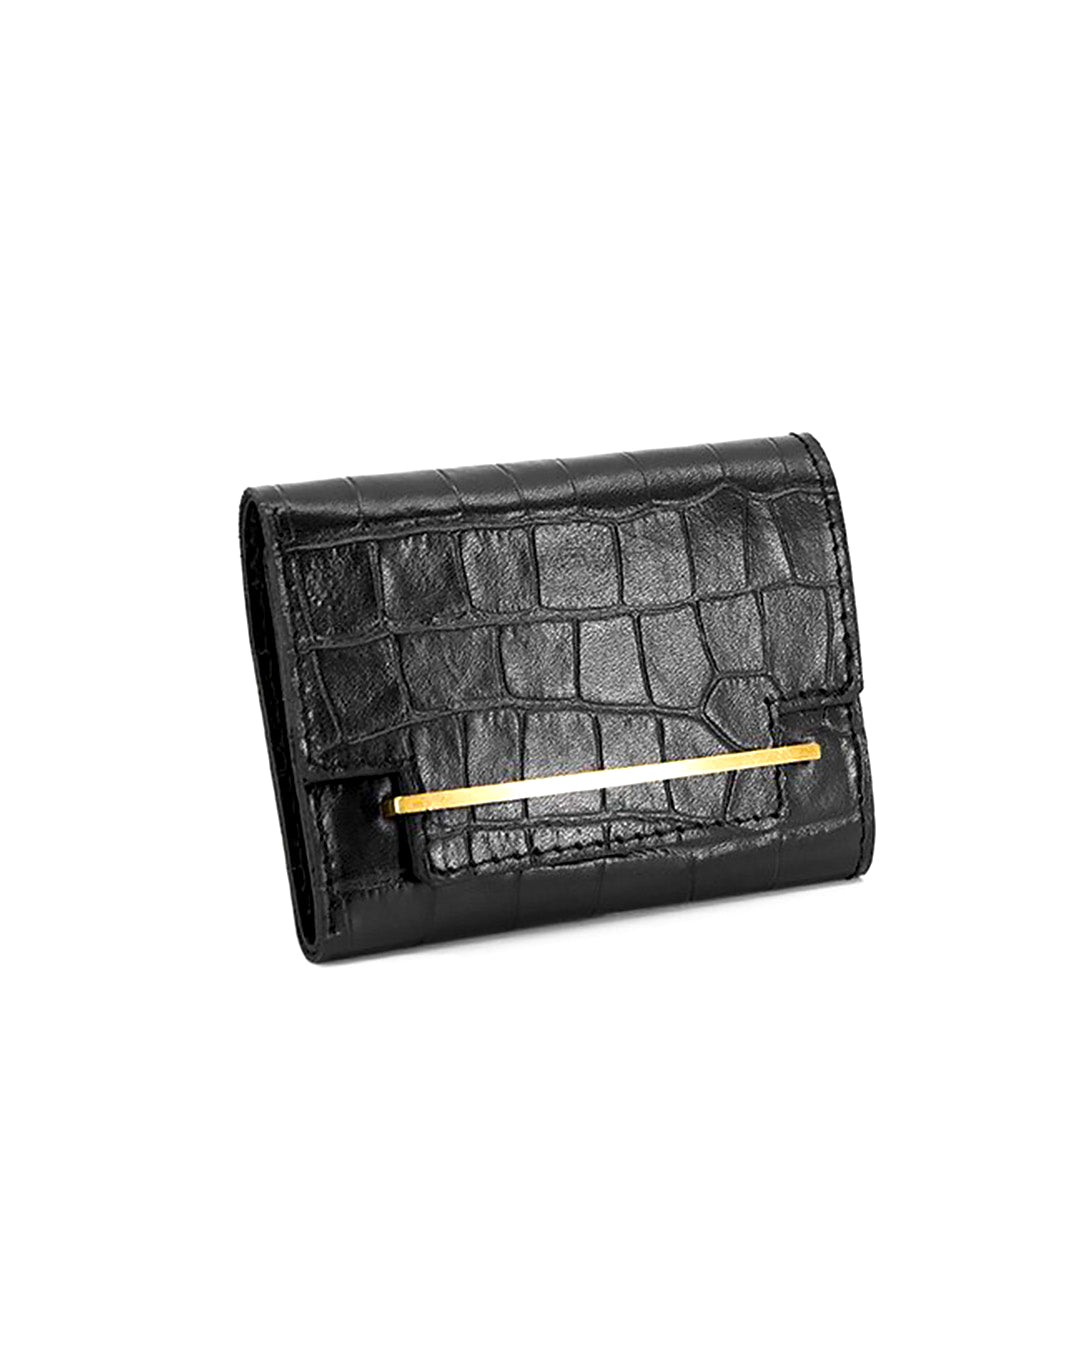 Wallet leather Croco Gold handmade handcrafted